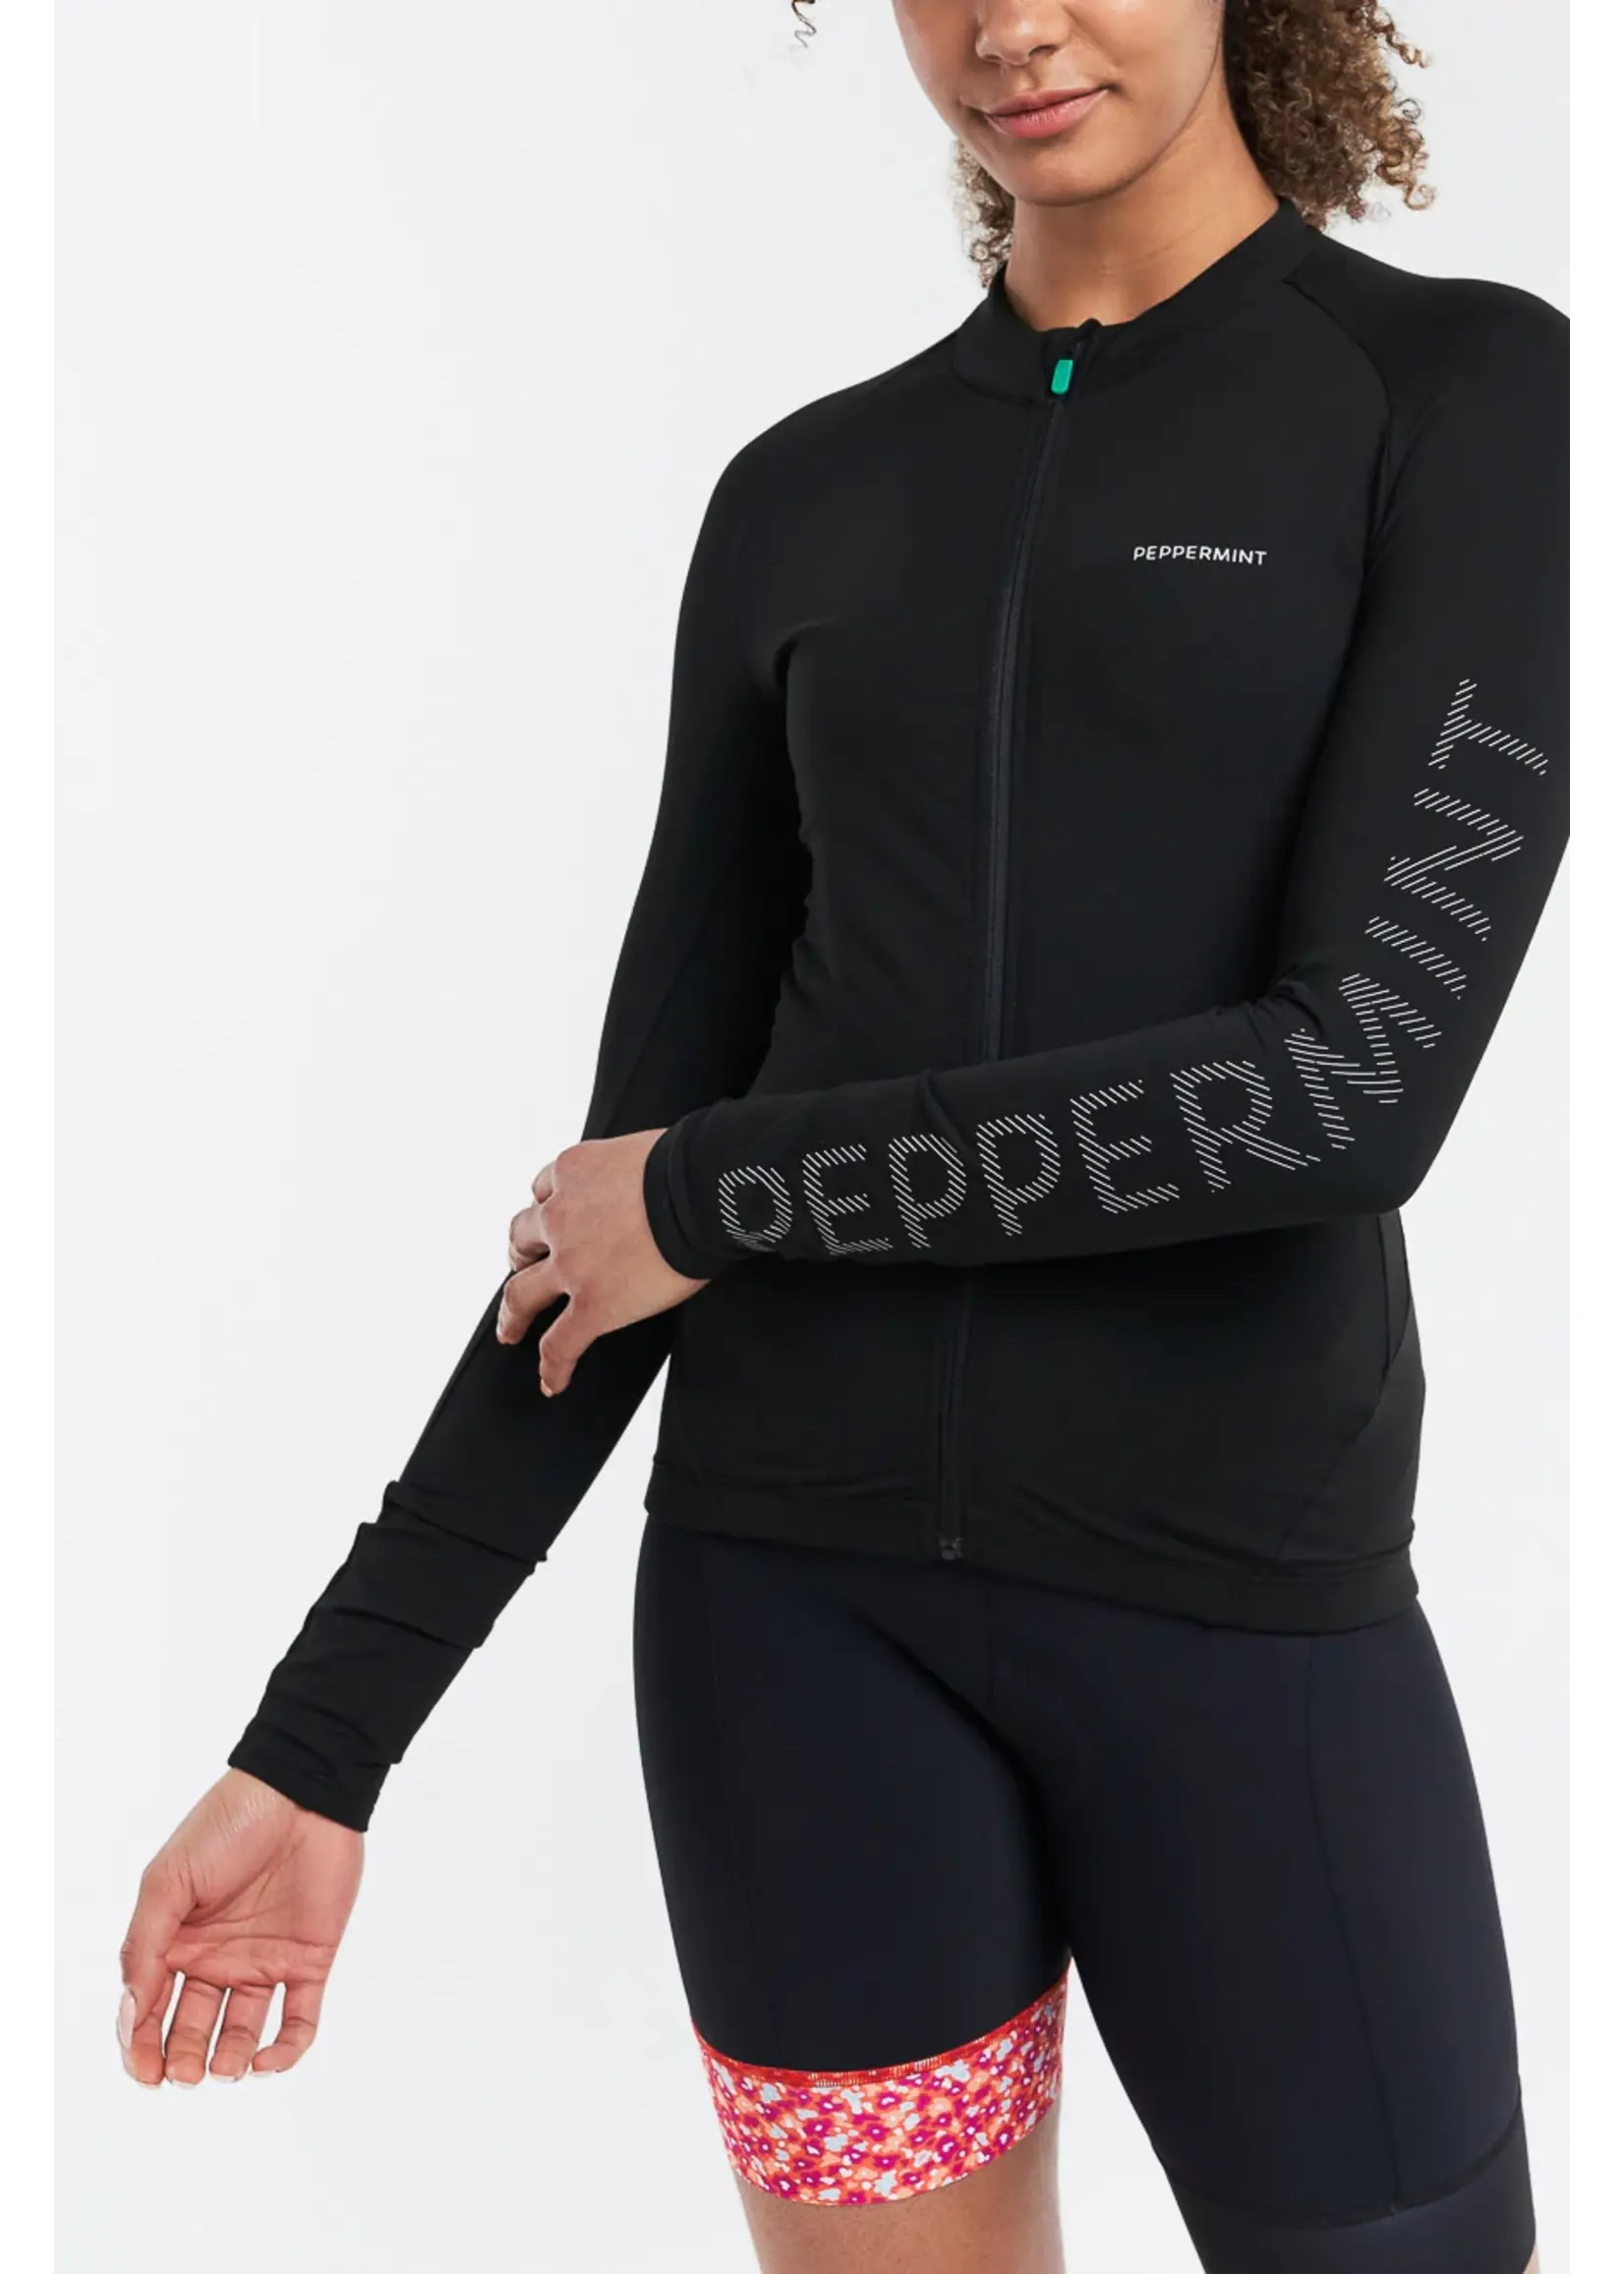 Peppermint PEPPERMINT SIGNATURE THERMAL JERSEY BLACK